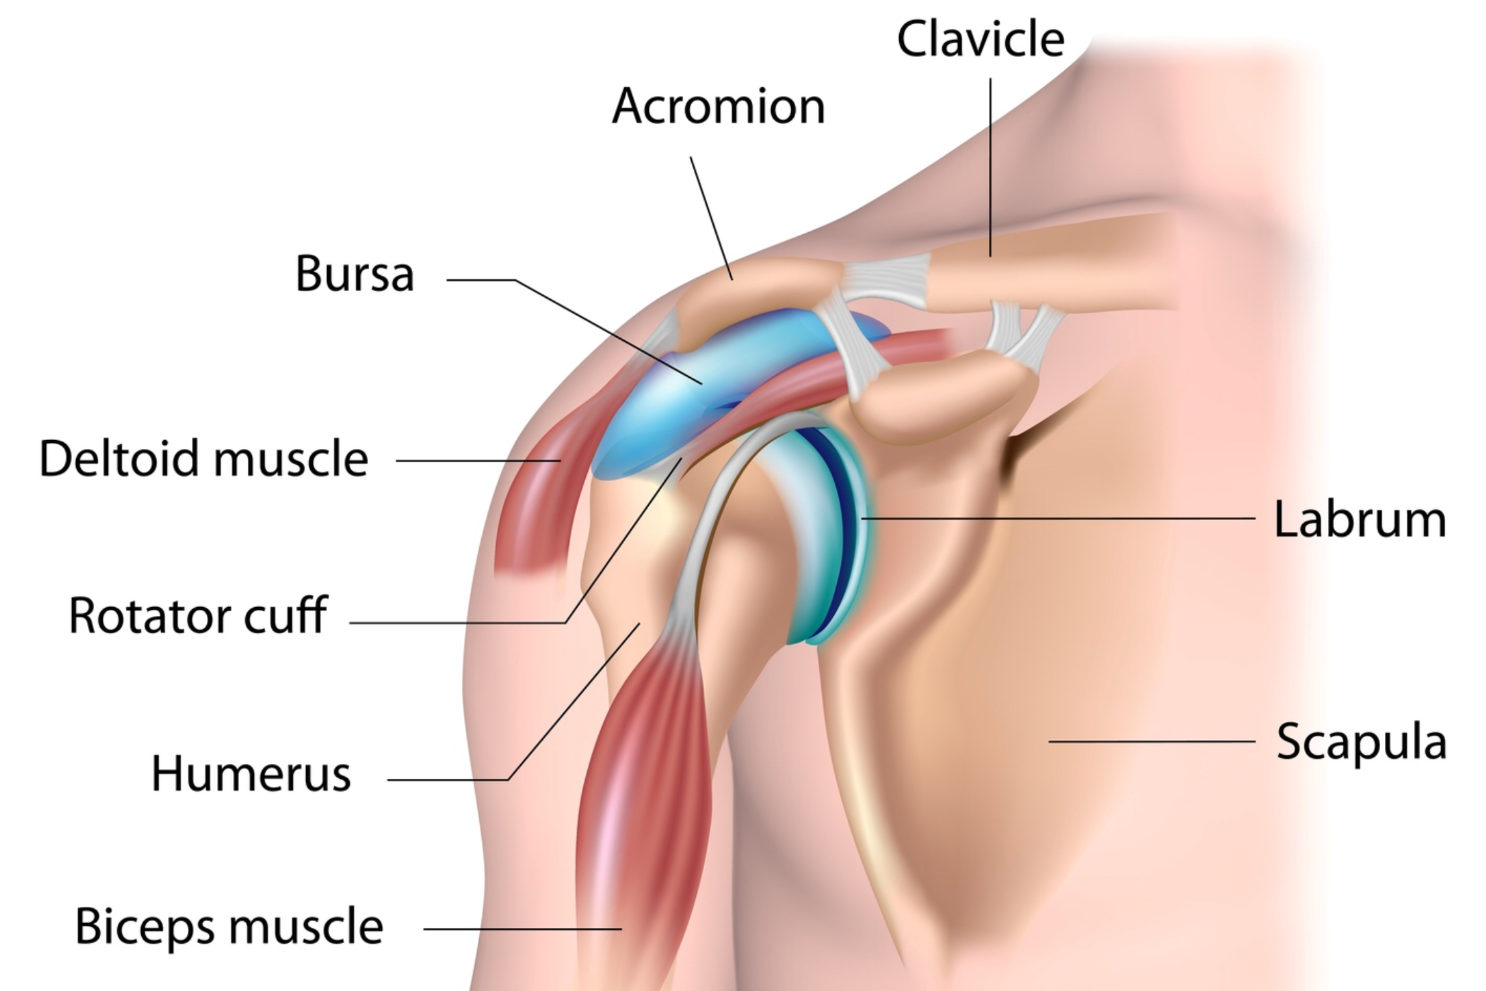 Rotator Cuff Strain Vs Tear: What's the Difference?